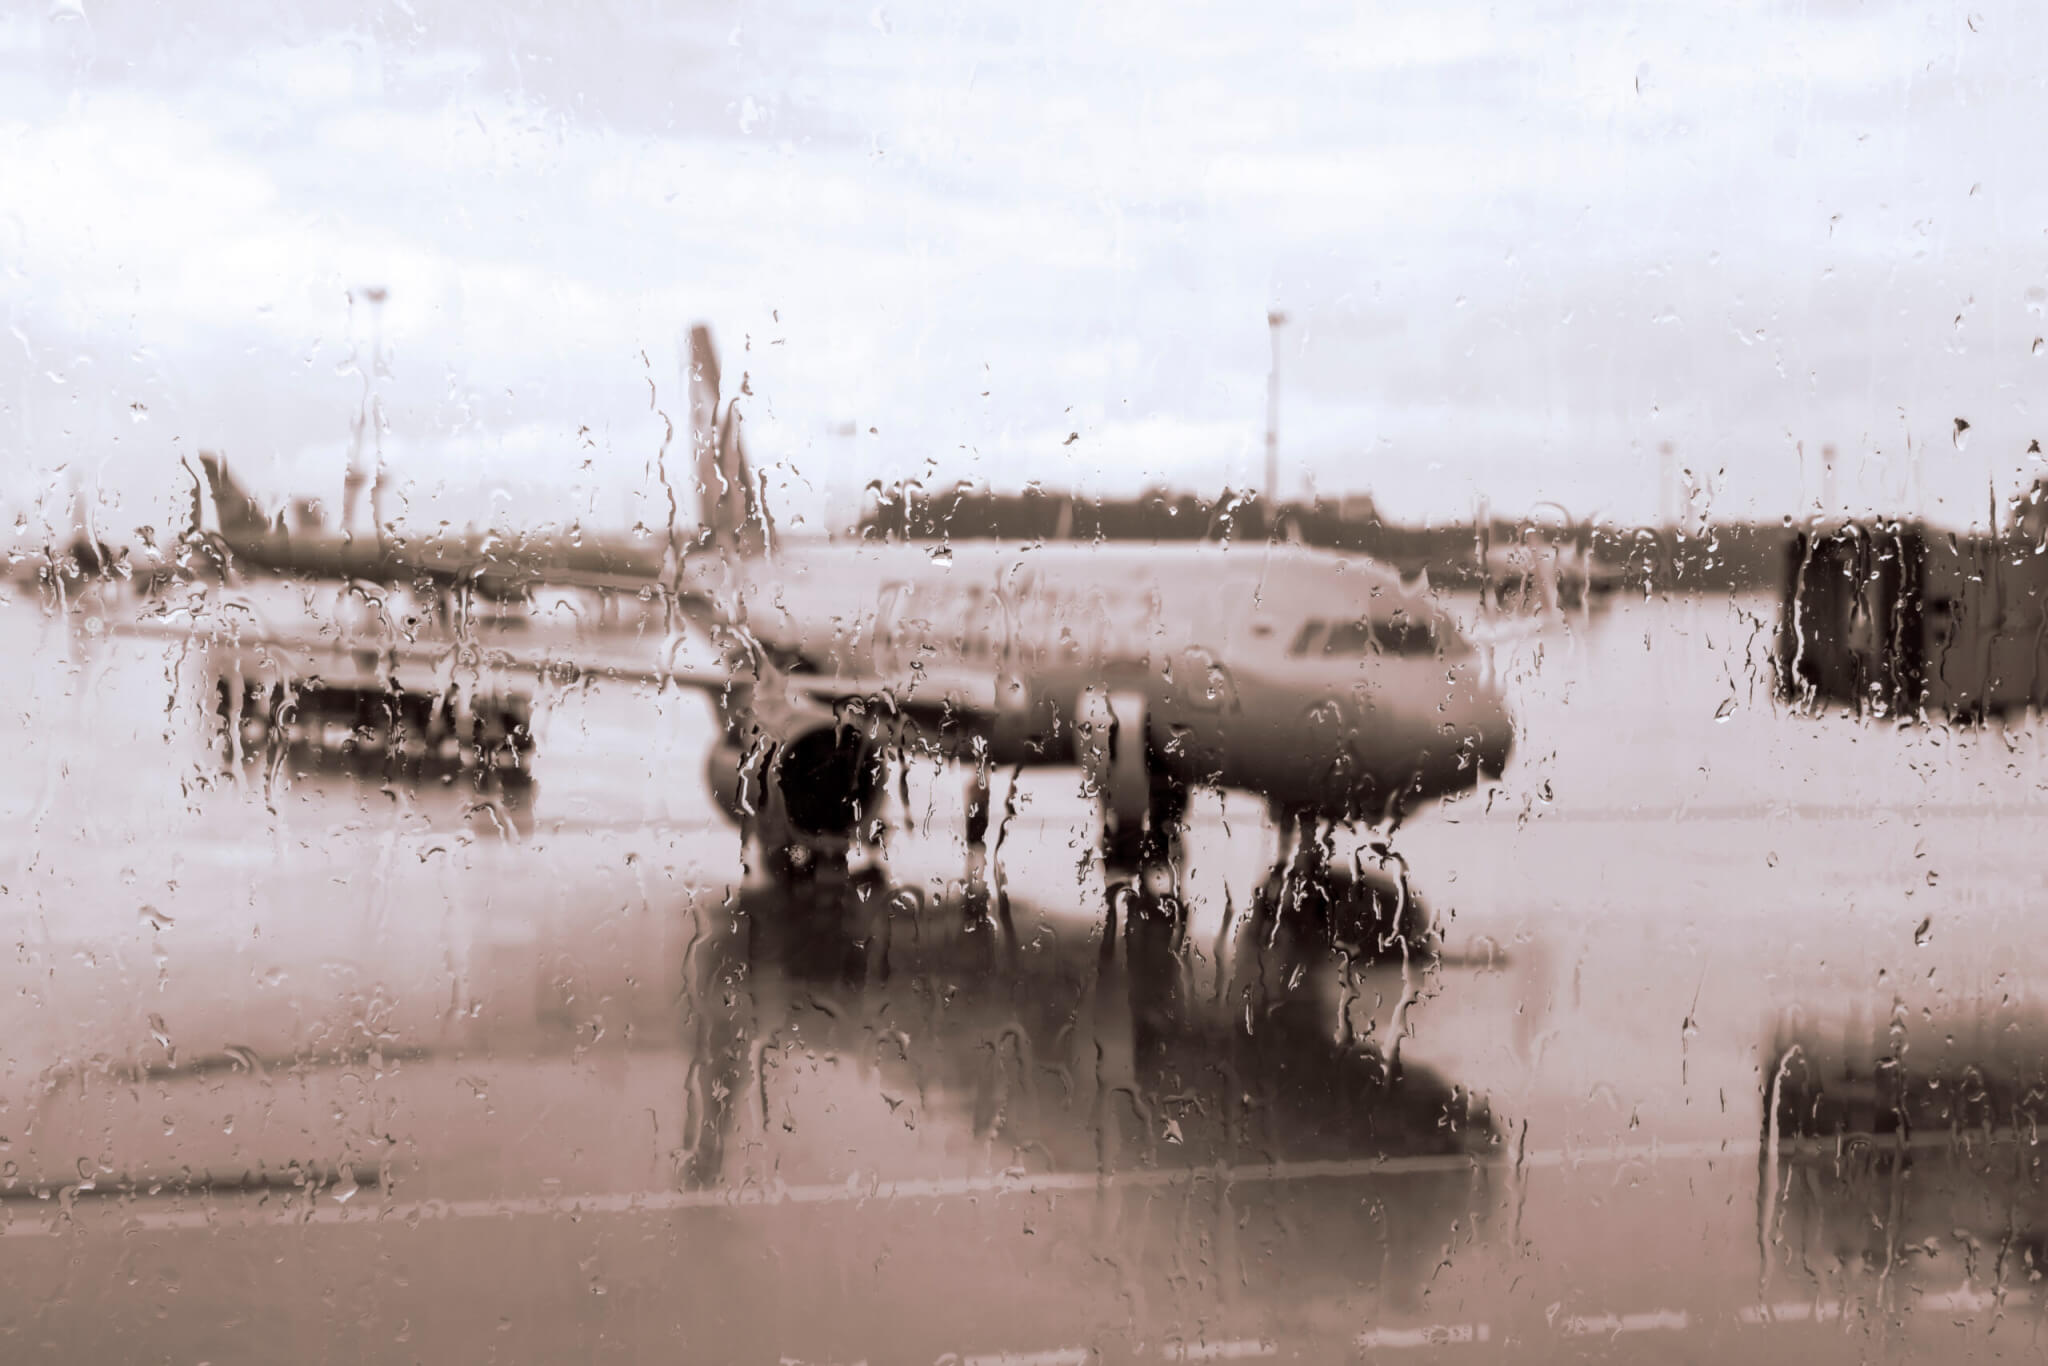 Unfocused view of the plane through the airport window, with raindrops.